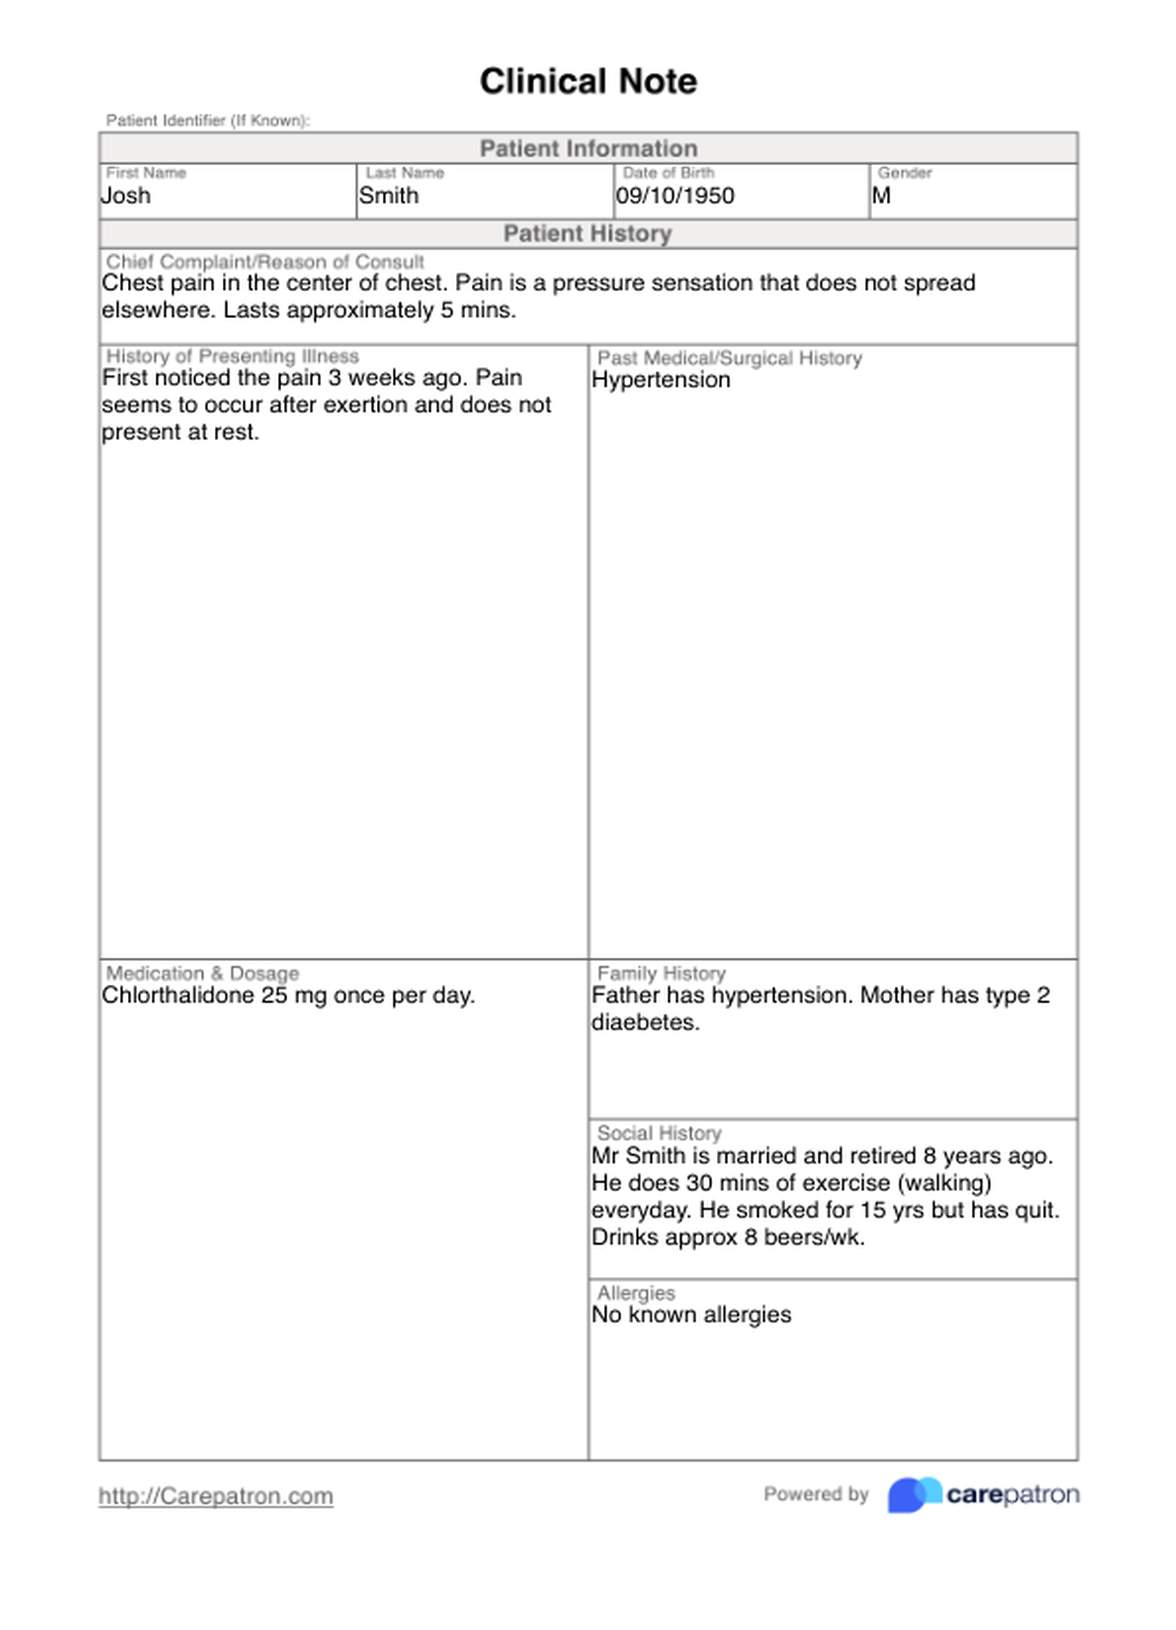 Clinical Note Template PDF Example